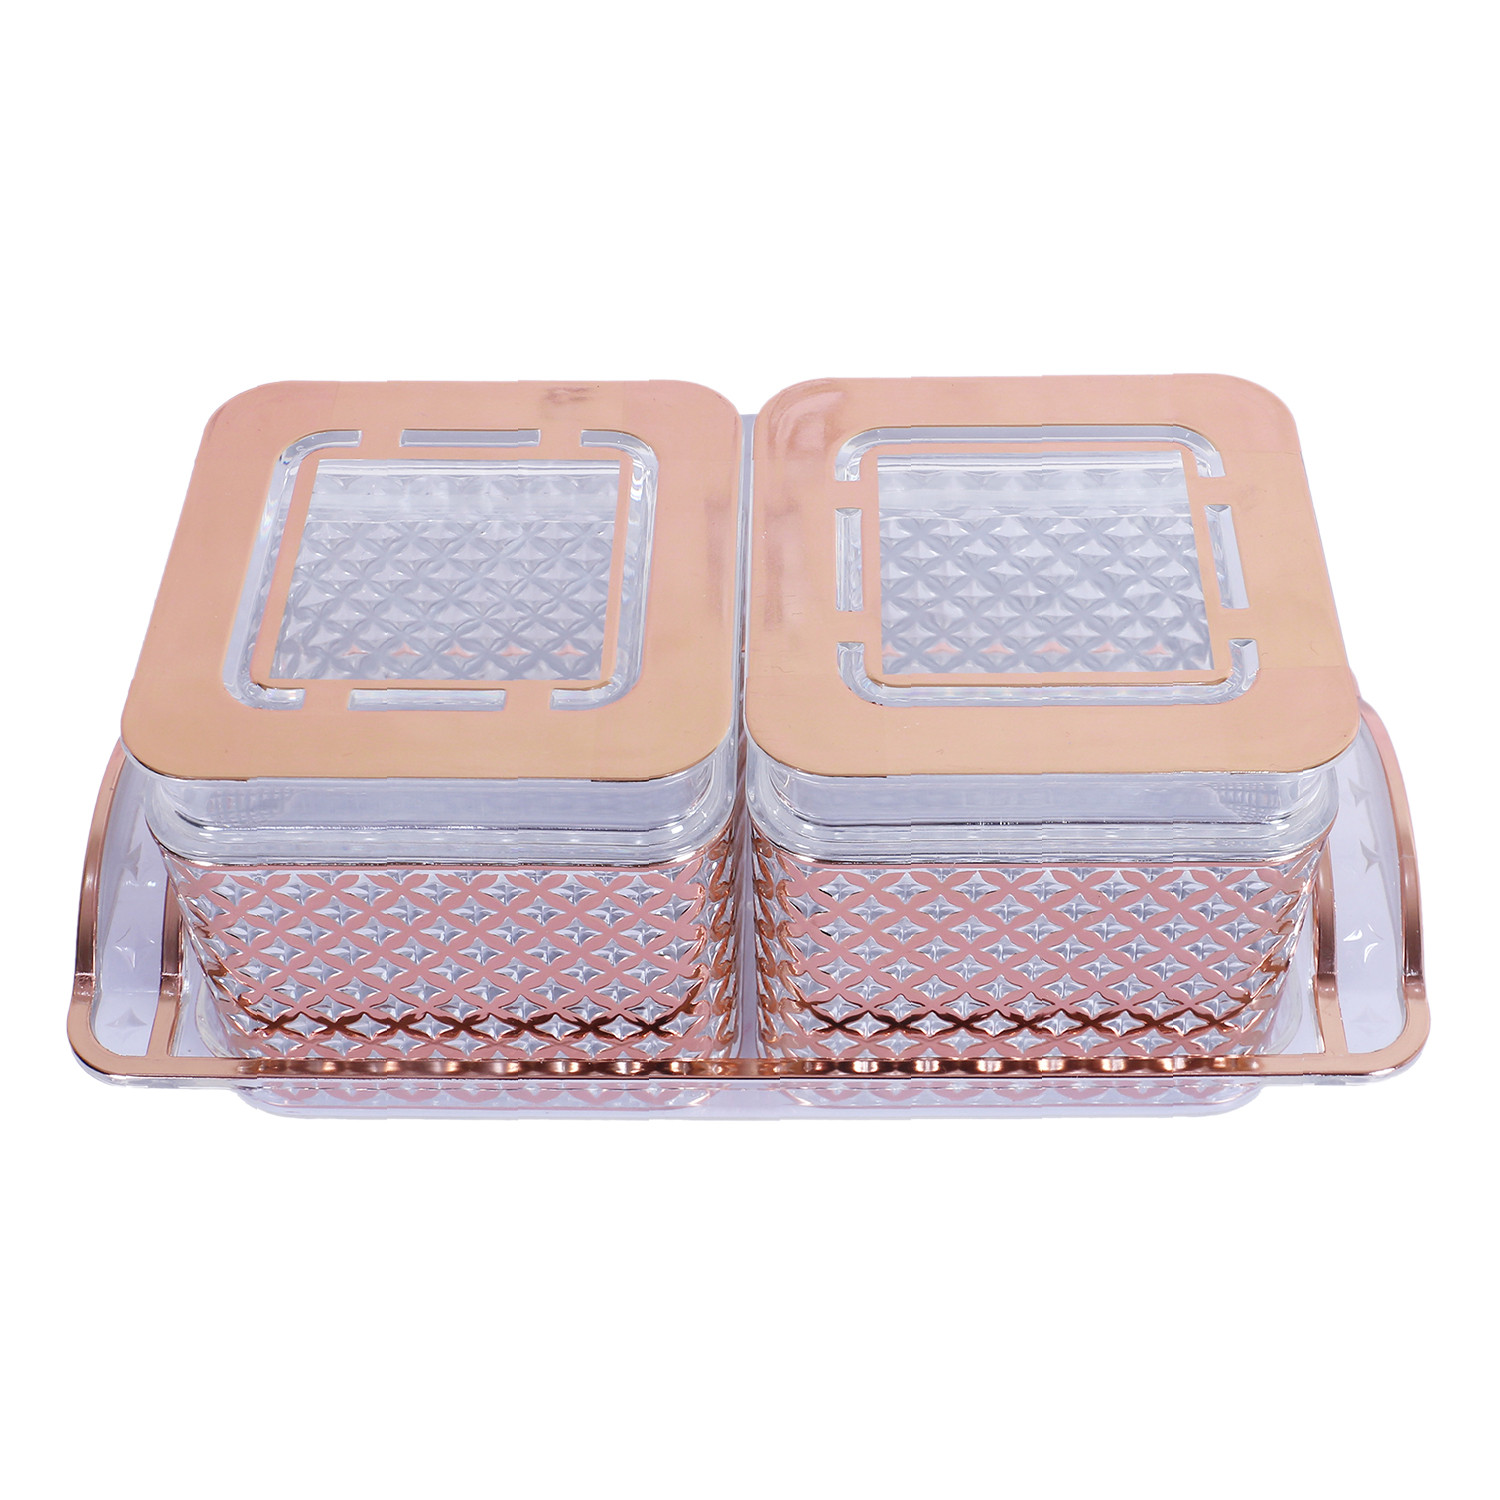 Kuber Industries 2 Containers & Tray Set|Unbreakable Plastic Snackers,Cookies,Nuts Serving Tray|Airtight Containers with Lid,400 ml (Peach)